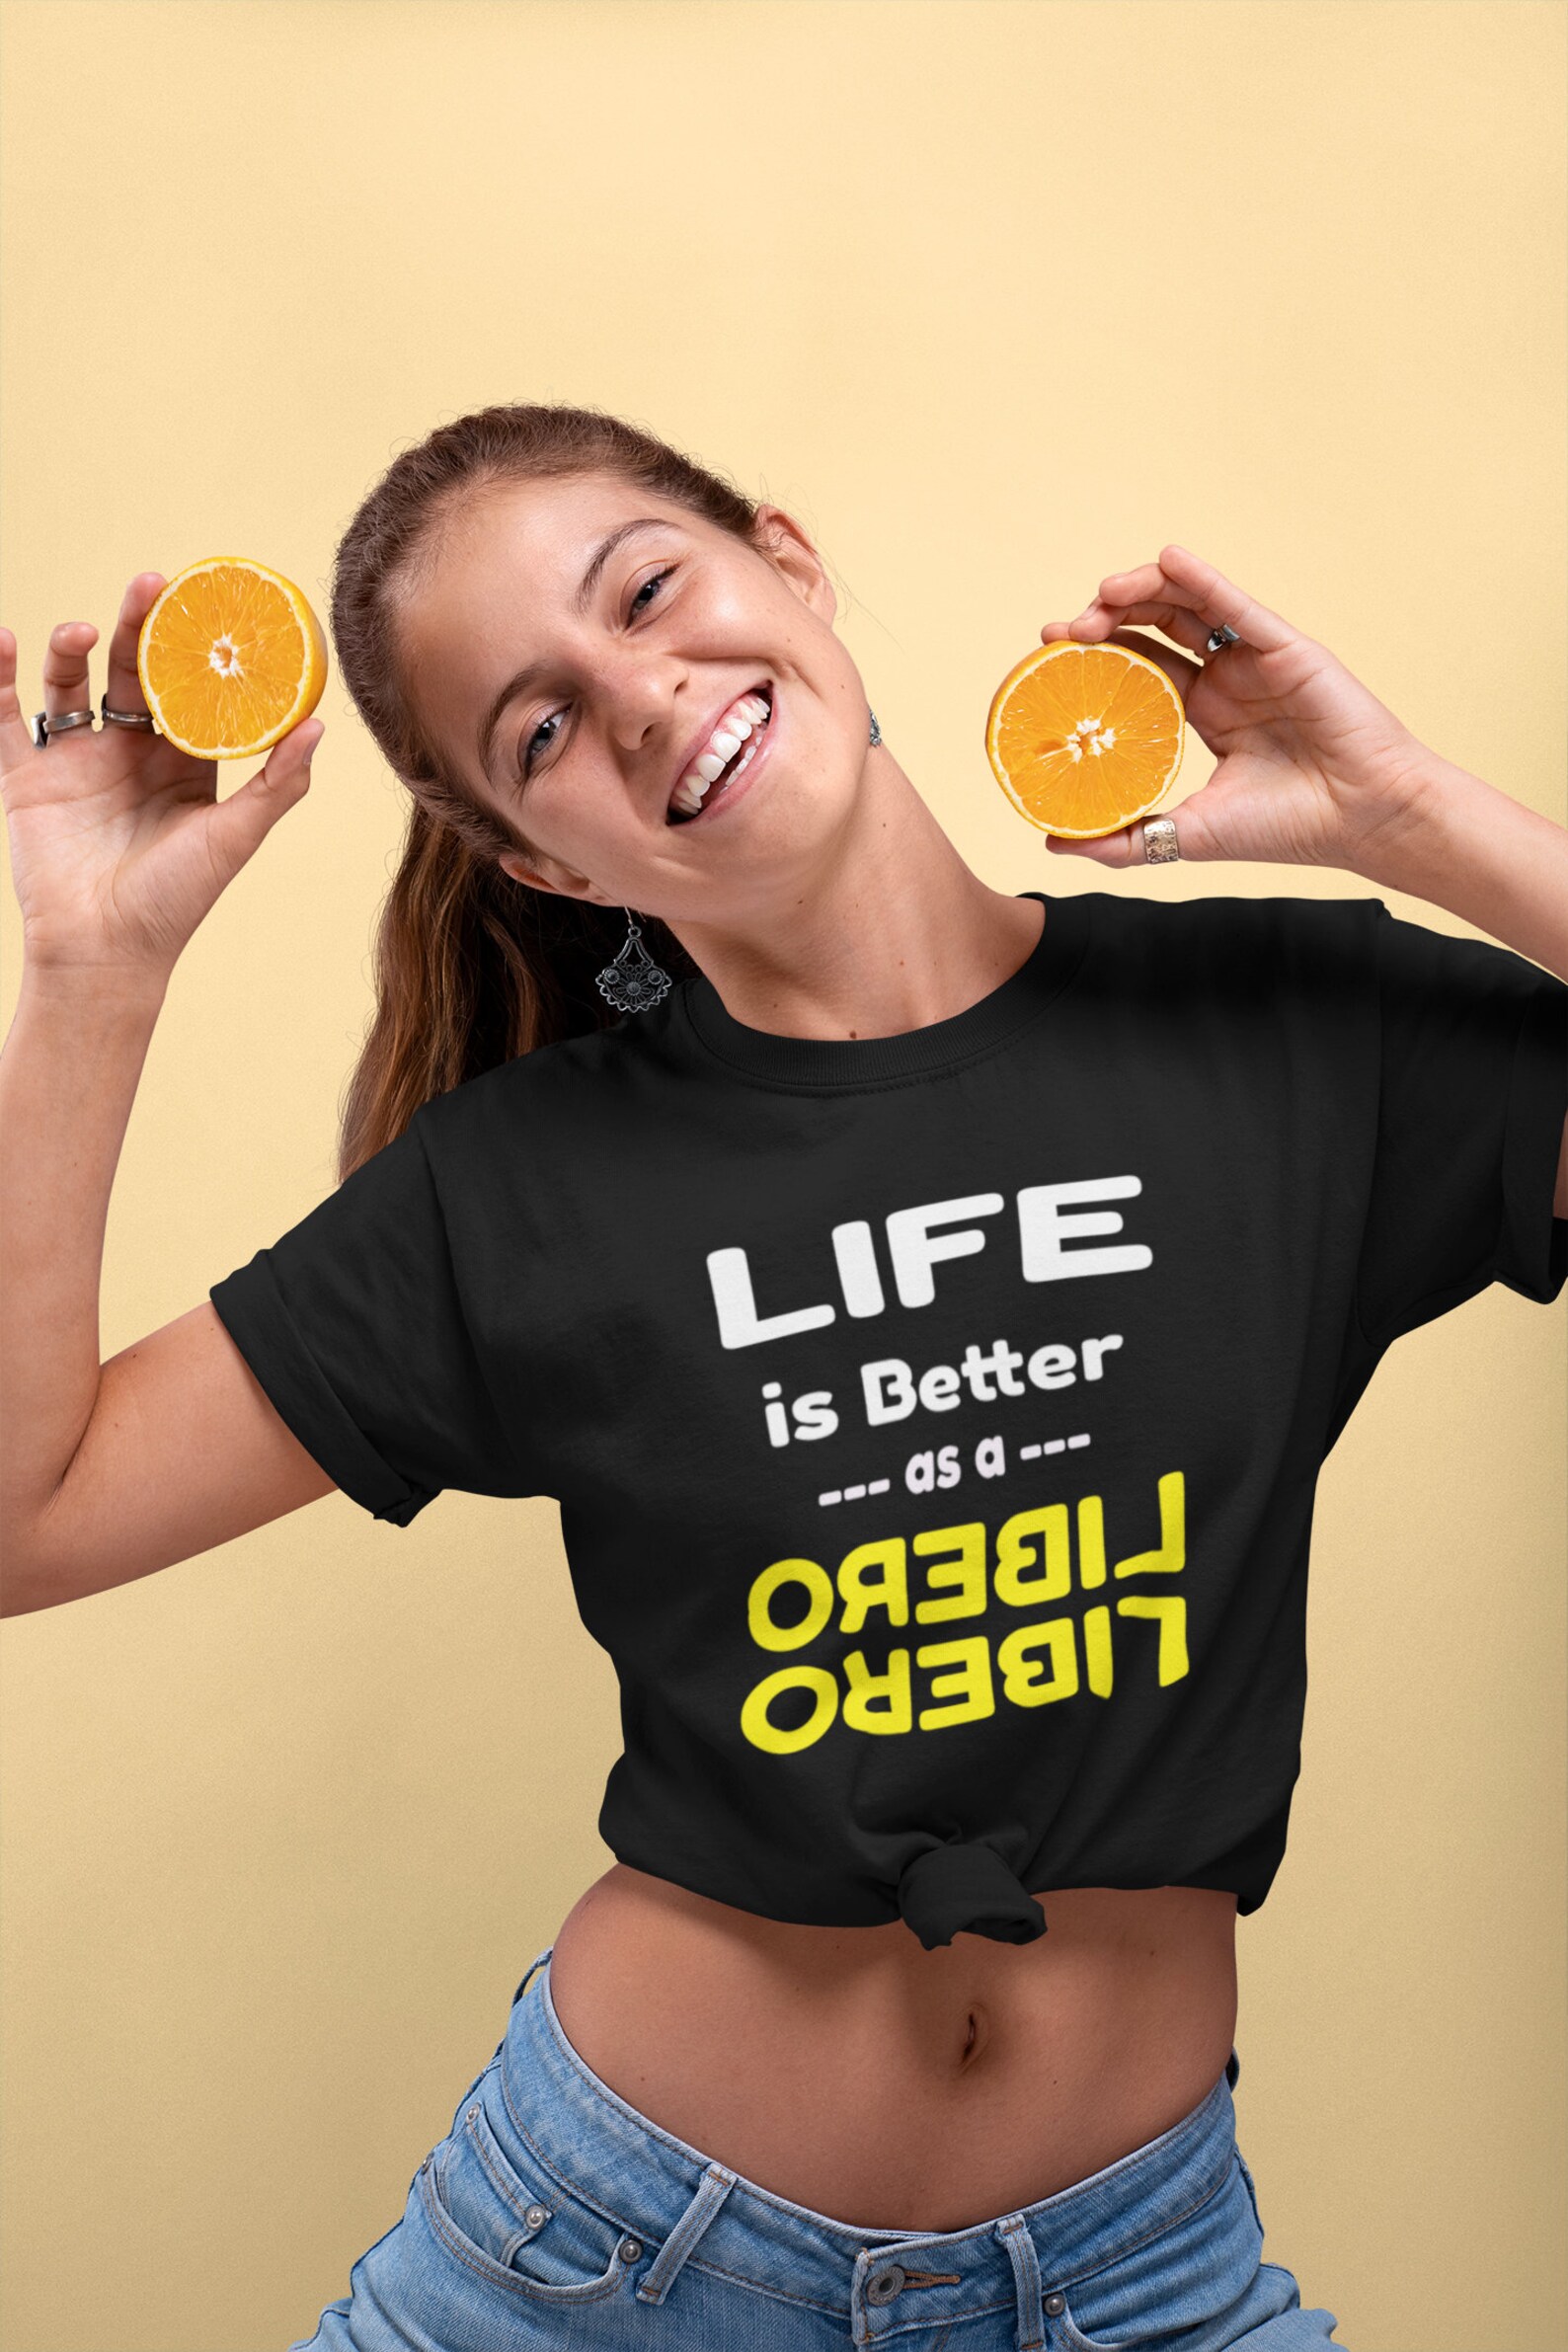 $24.00

Cute Volleyball Shirts, Life Is Better As A Libero, Volleyball Libero shirts, libero tshirts, shirts for liberos, libero tees, volleyball